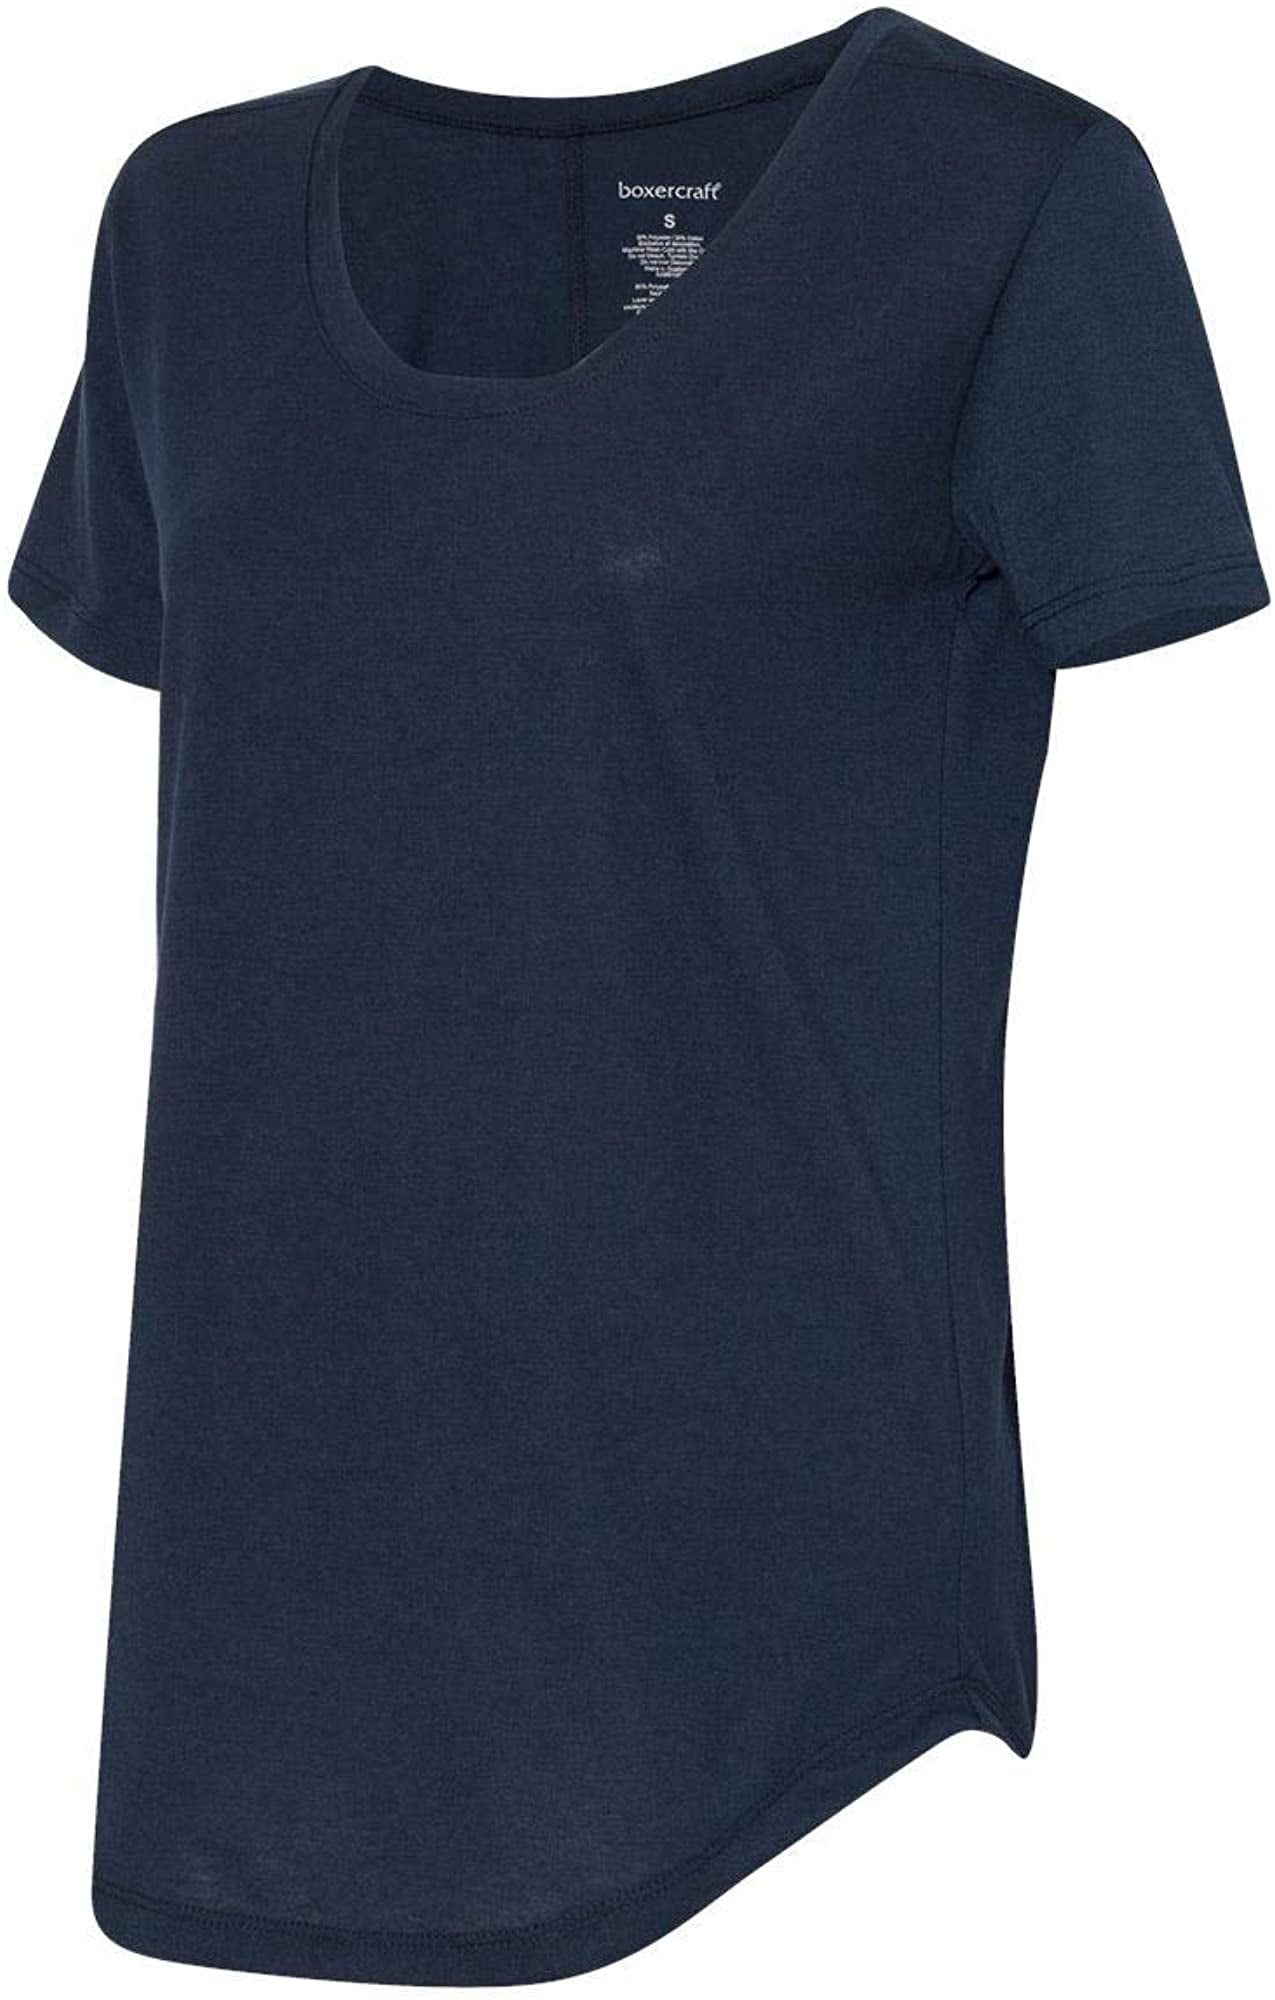 boxercraft Womens at Ease Scoopneck Tee T61-3XL Navy